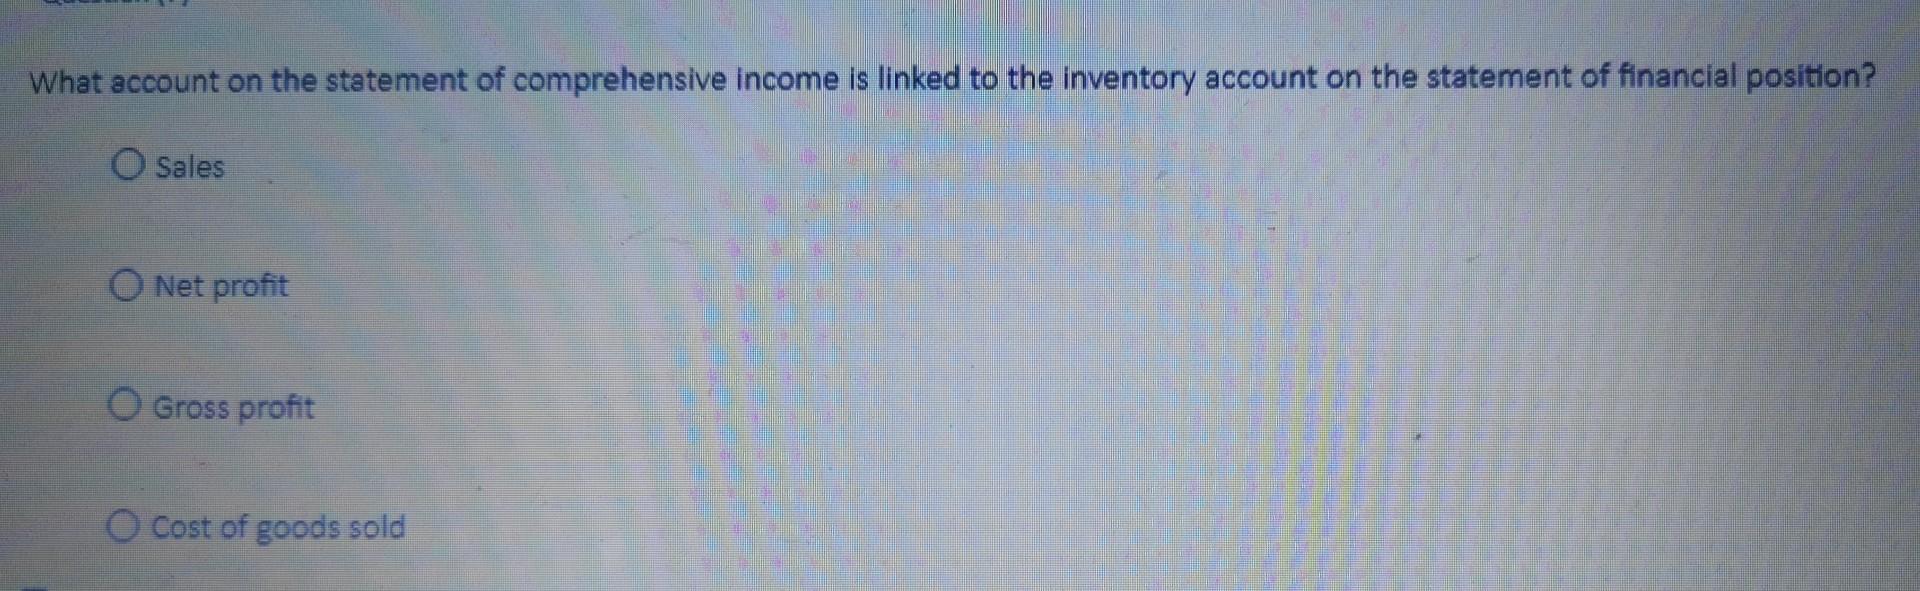 What account on the statement of comprehensive income is linked to the inventory account on the statement of financial positi